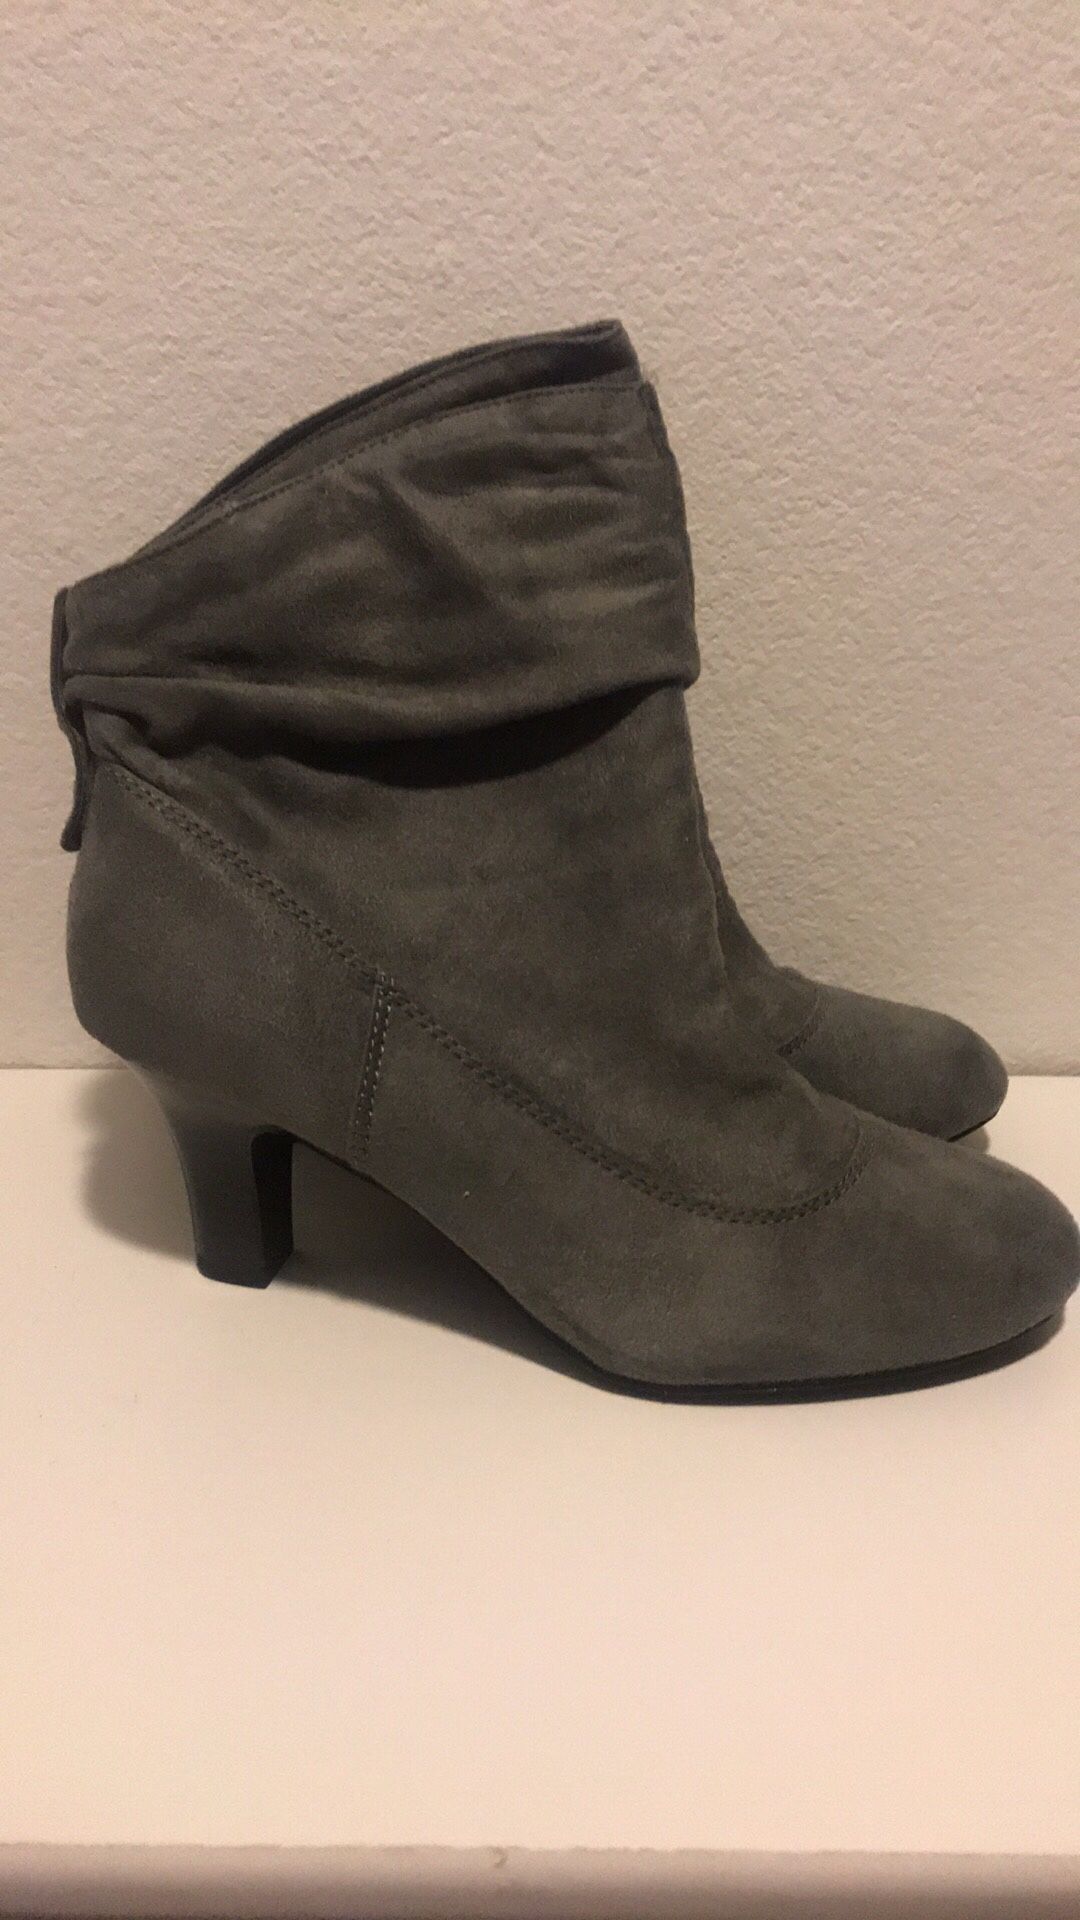 Jcpennys boots